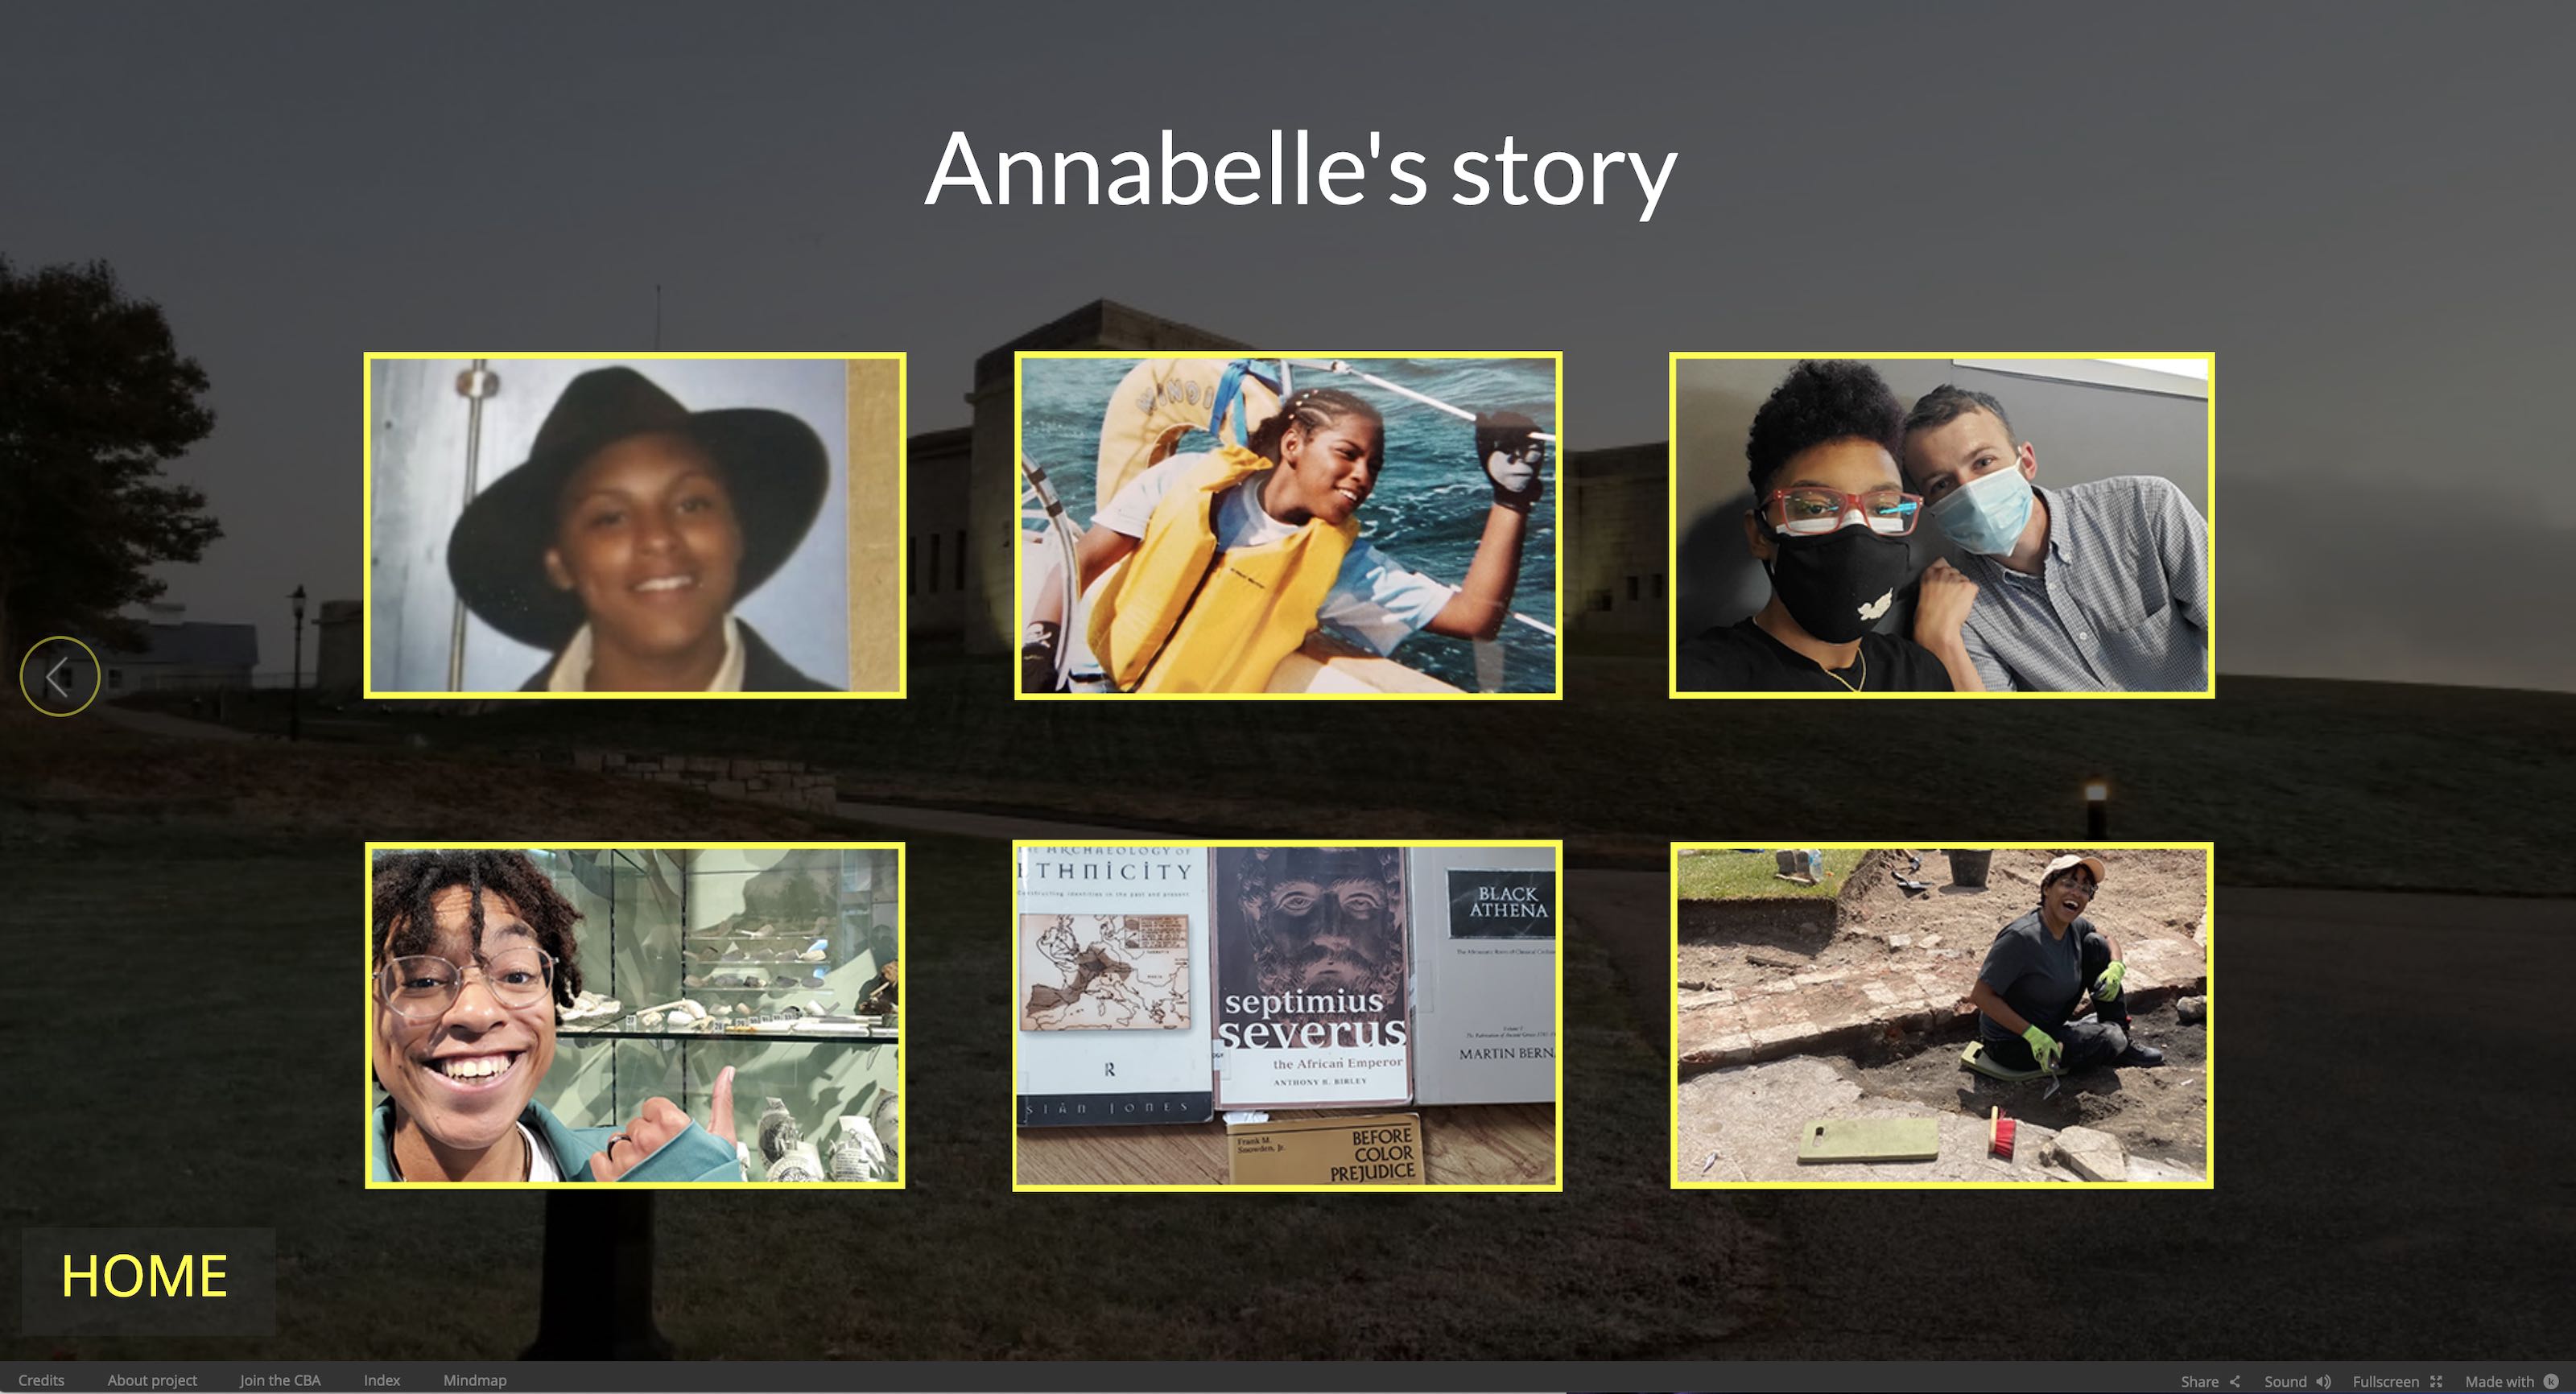 Image 4_Annabelle story page.jpg